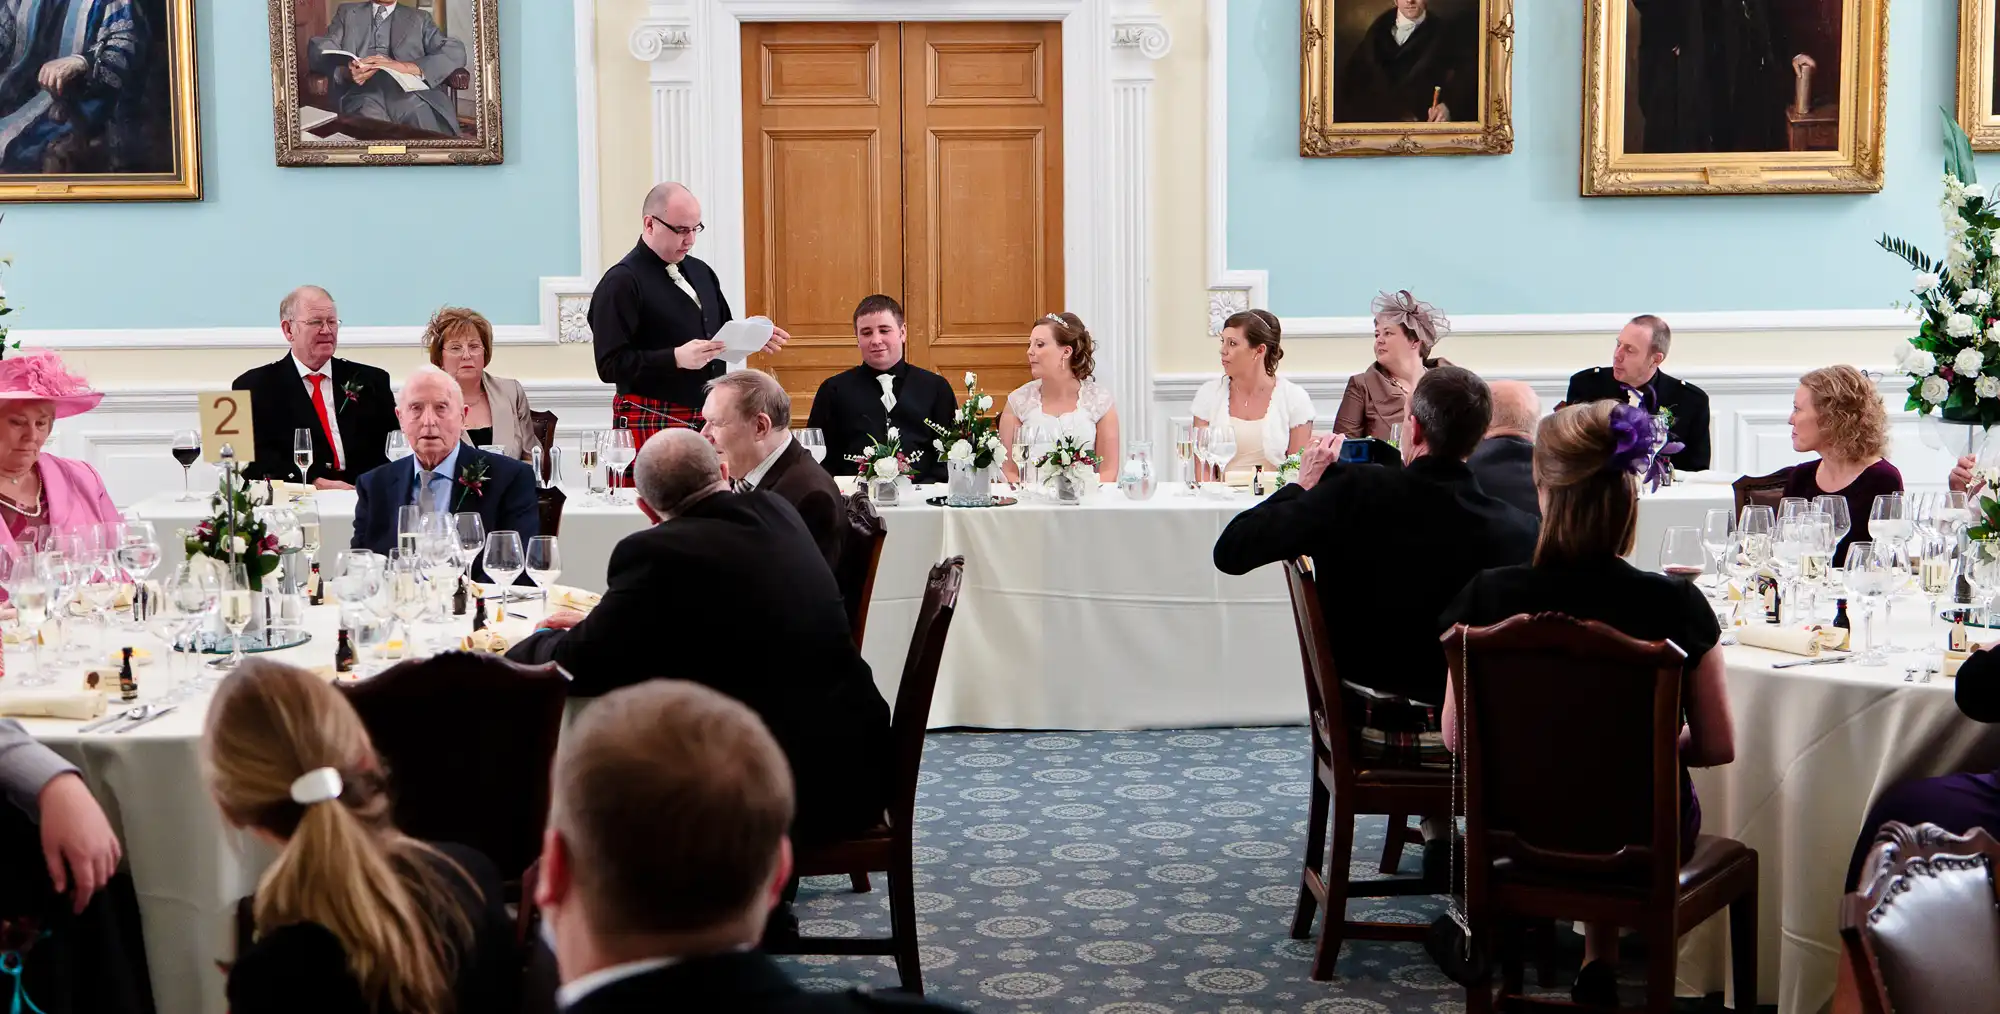 Wedding guests seated at a formal dinner, watching a man giving a speech at the head table, in a room adorned with portraits.